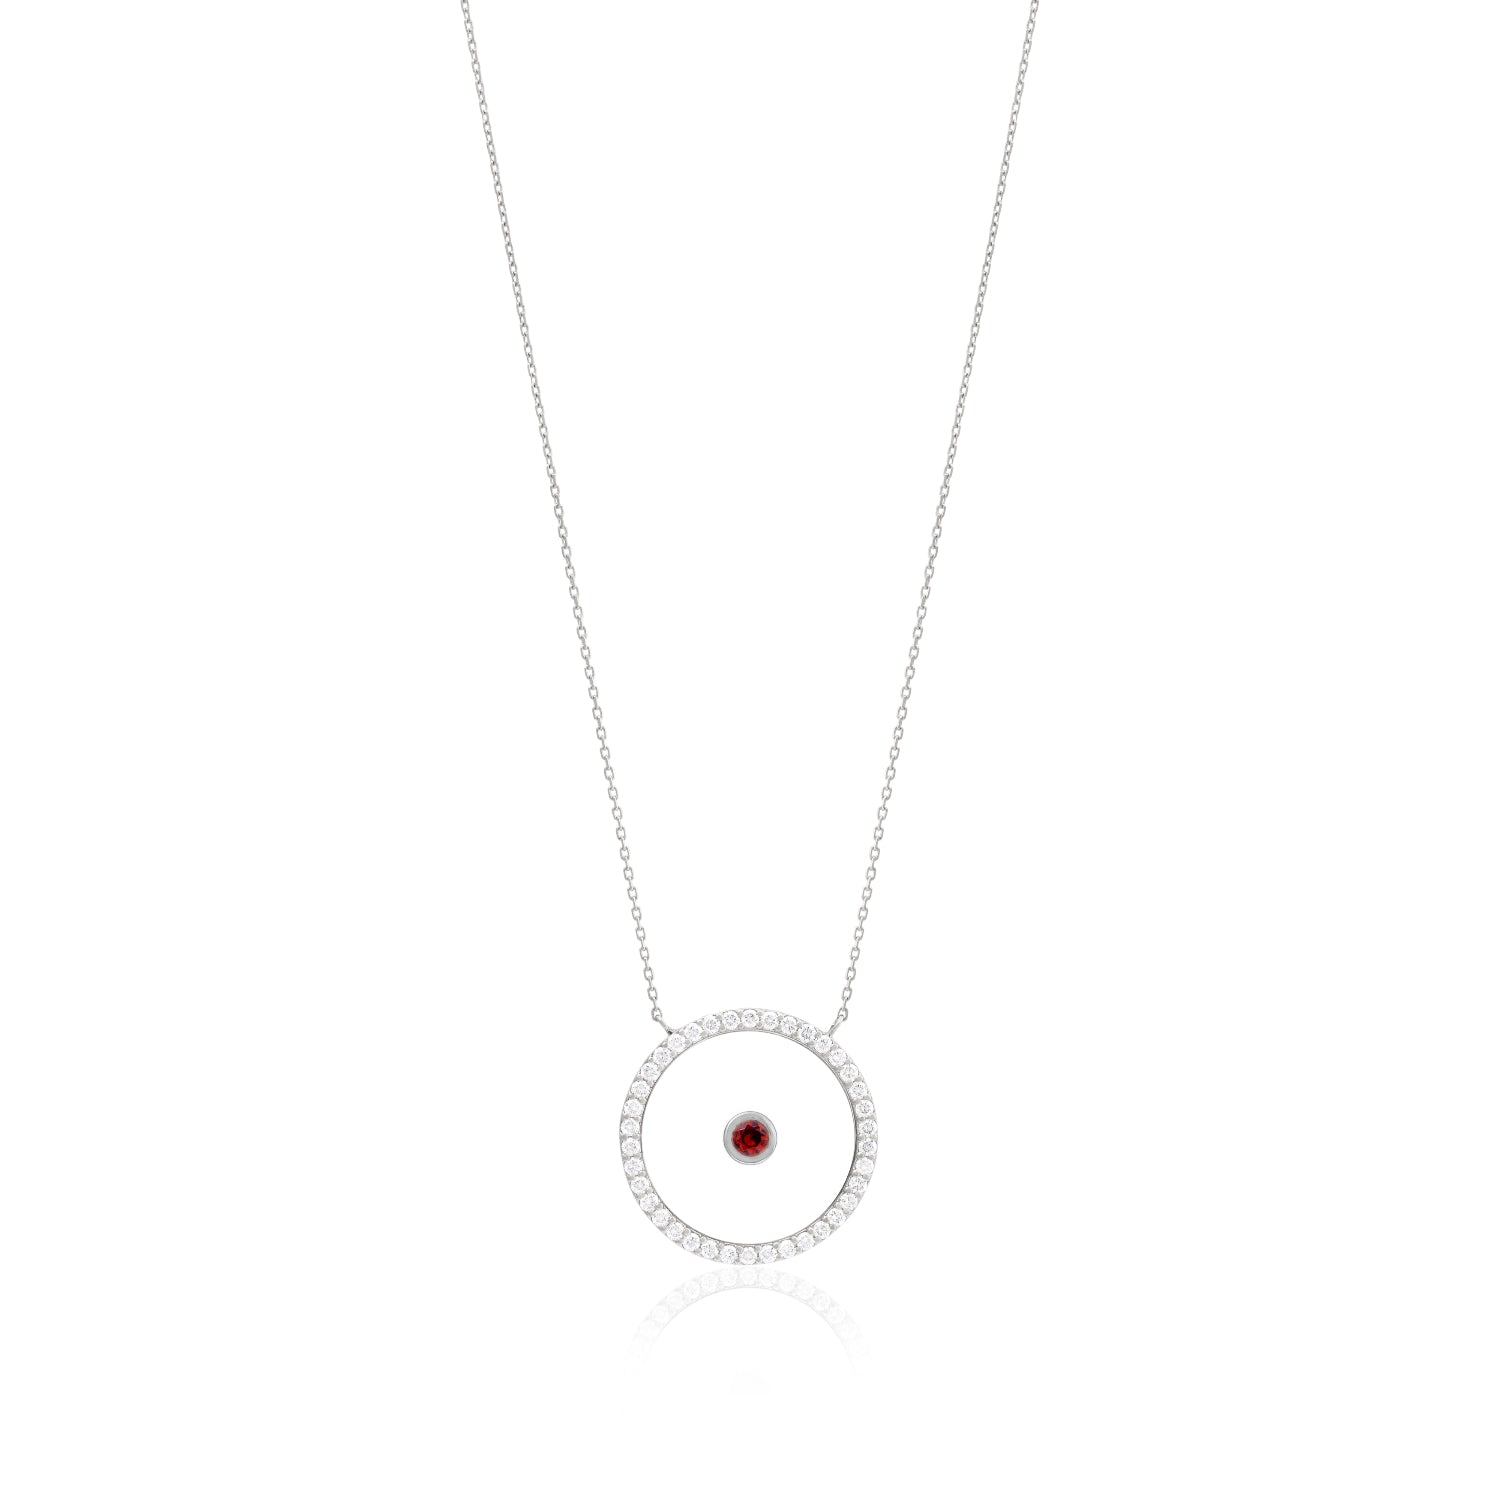 Garnet January Birthstone Necklace in White Gold